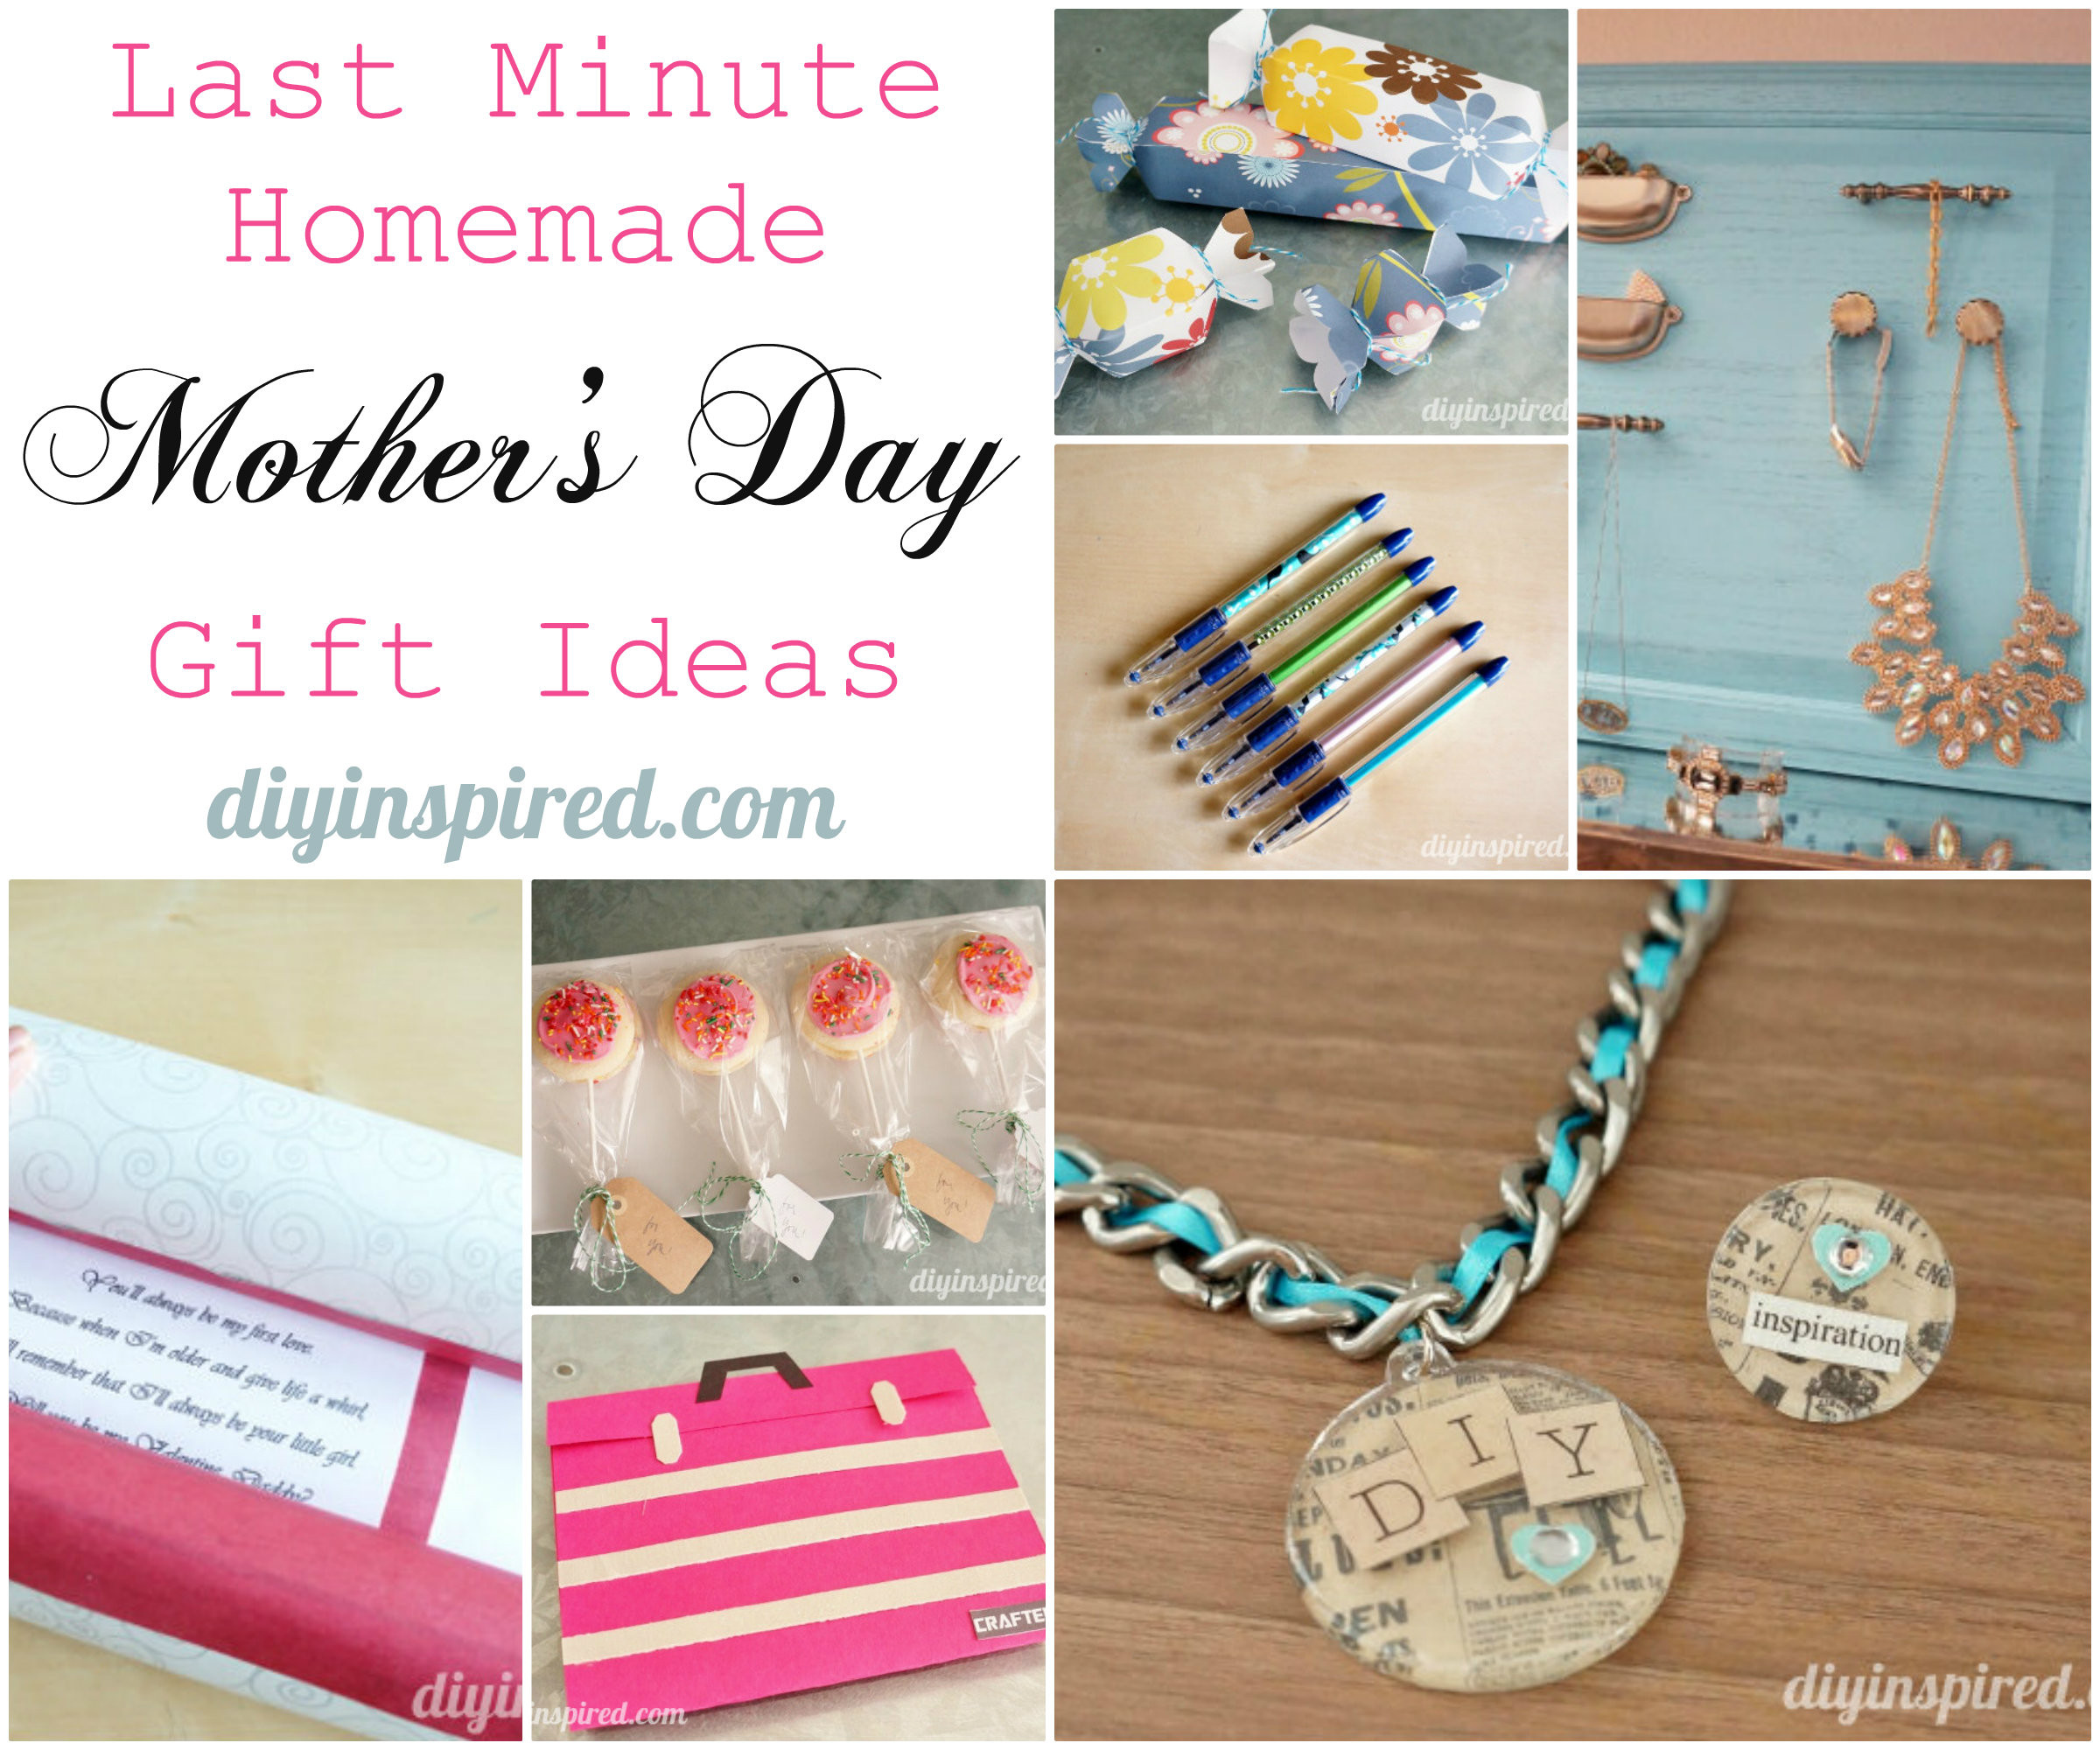 Last Minute Mothers Day Gift Ideas
 Last Minute Homemade Mother’s Day Gift Ideas DIY Inspired